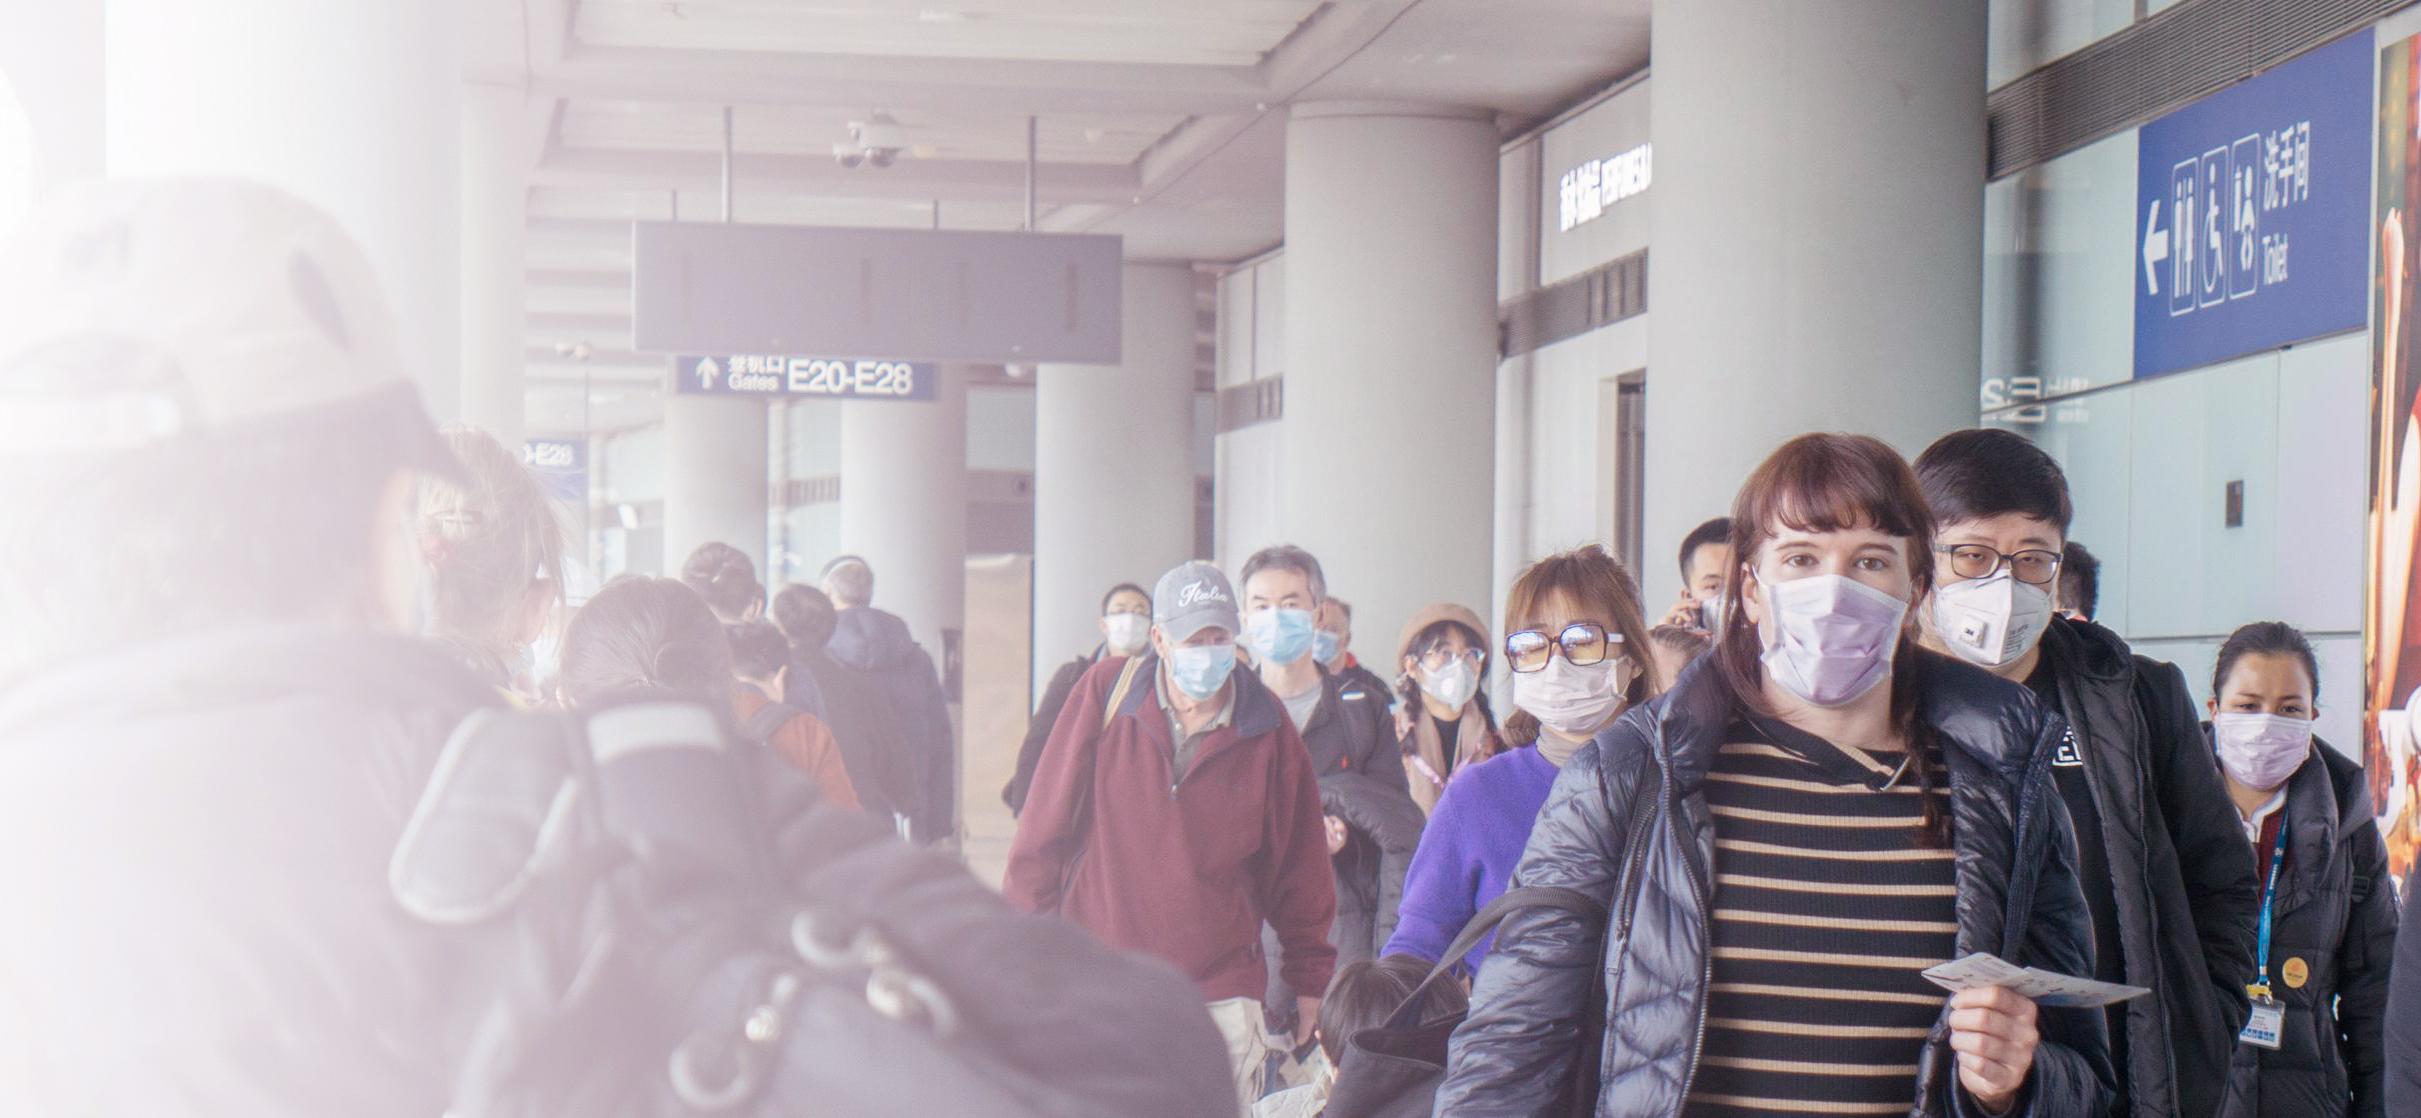 People in surgical masks